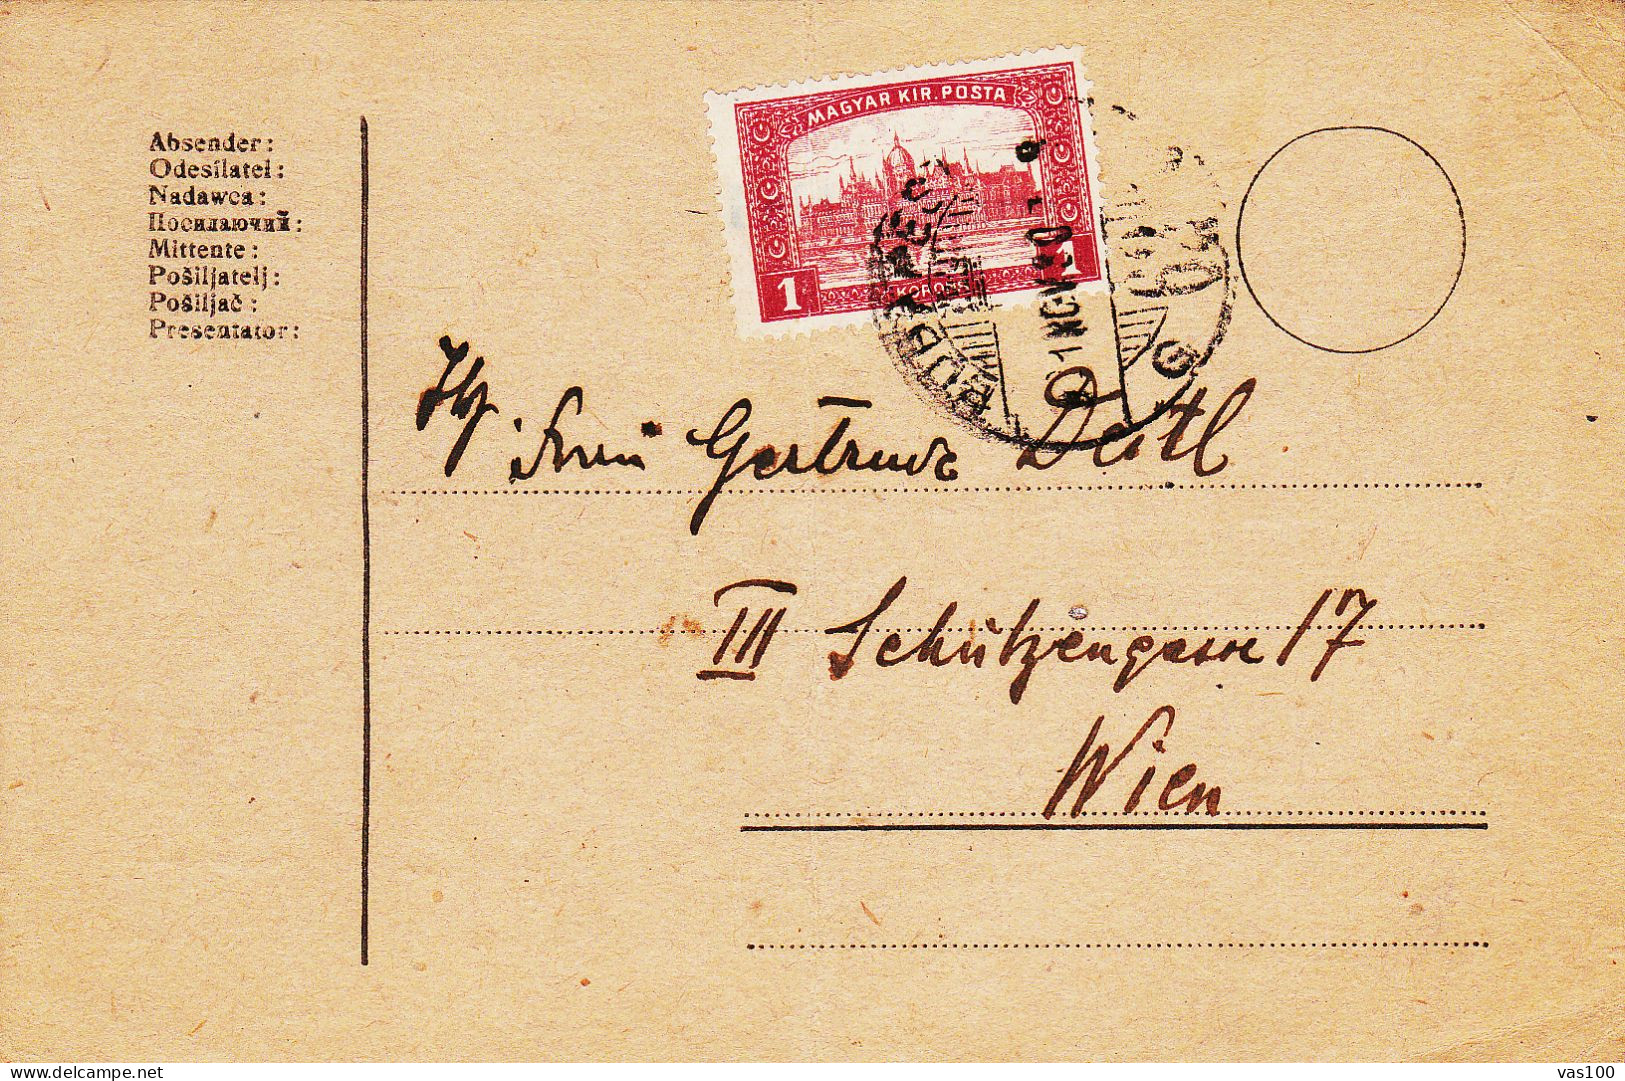 Hungary 1k,PARLIAMENT  POST CARD 1922 FROM BUDAPEST TO WIEN - Covers & Documents